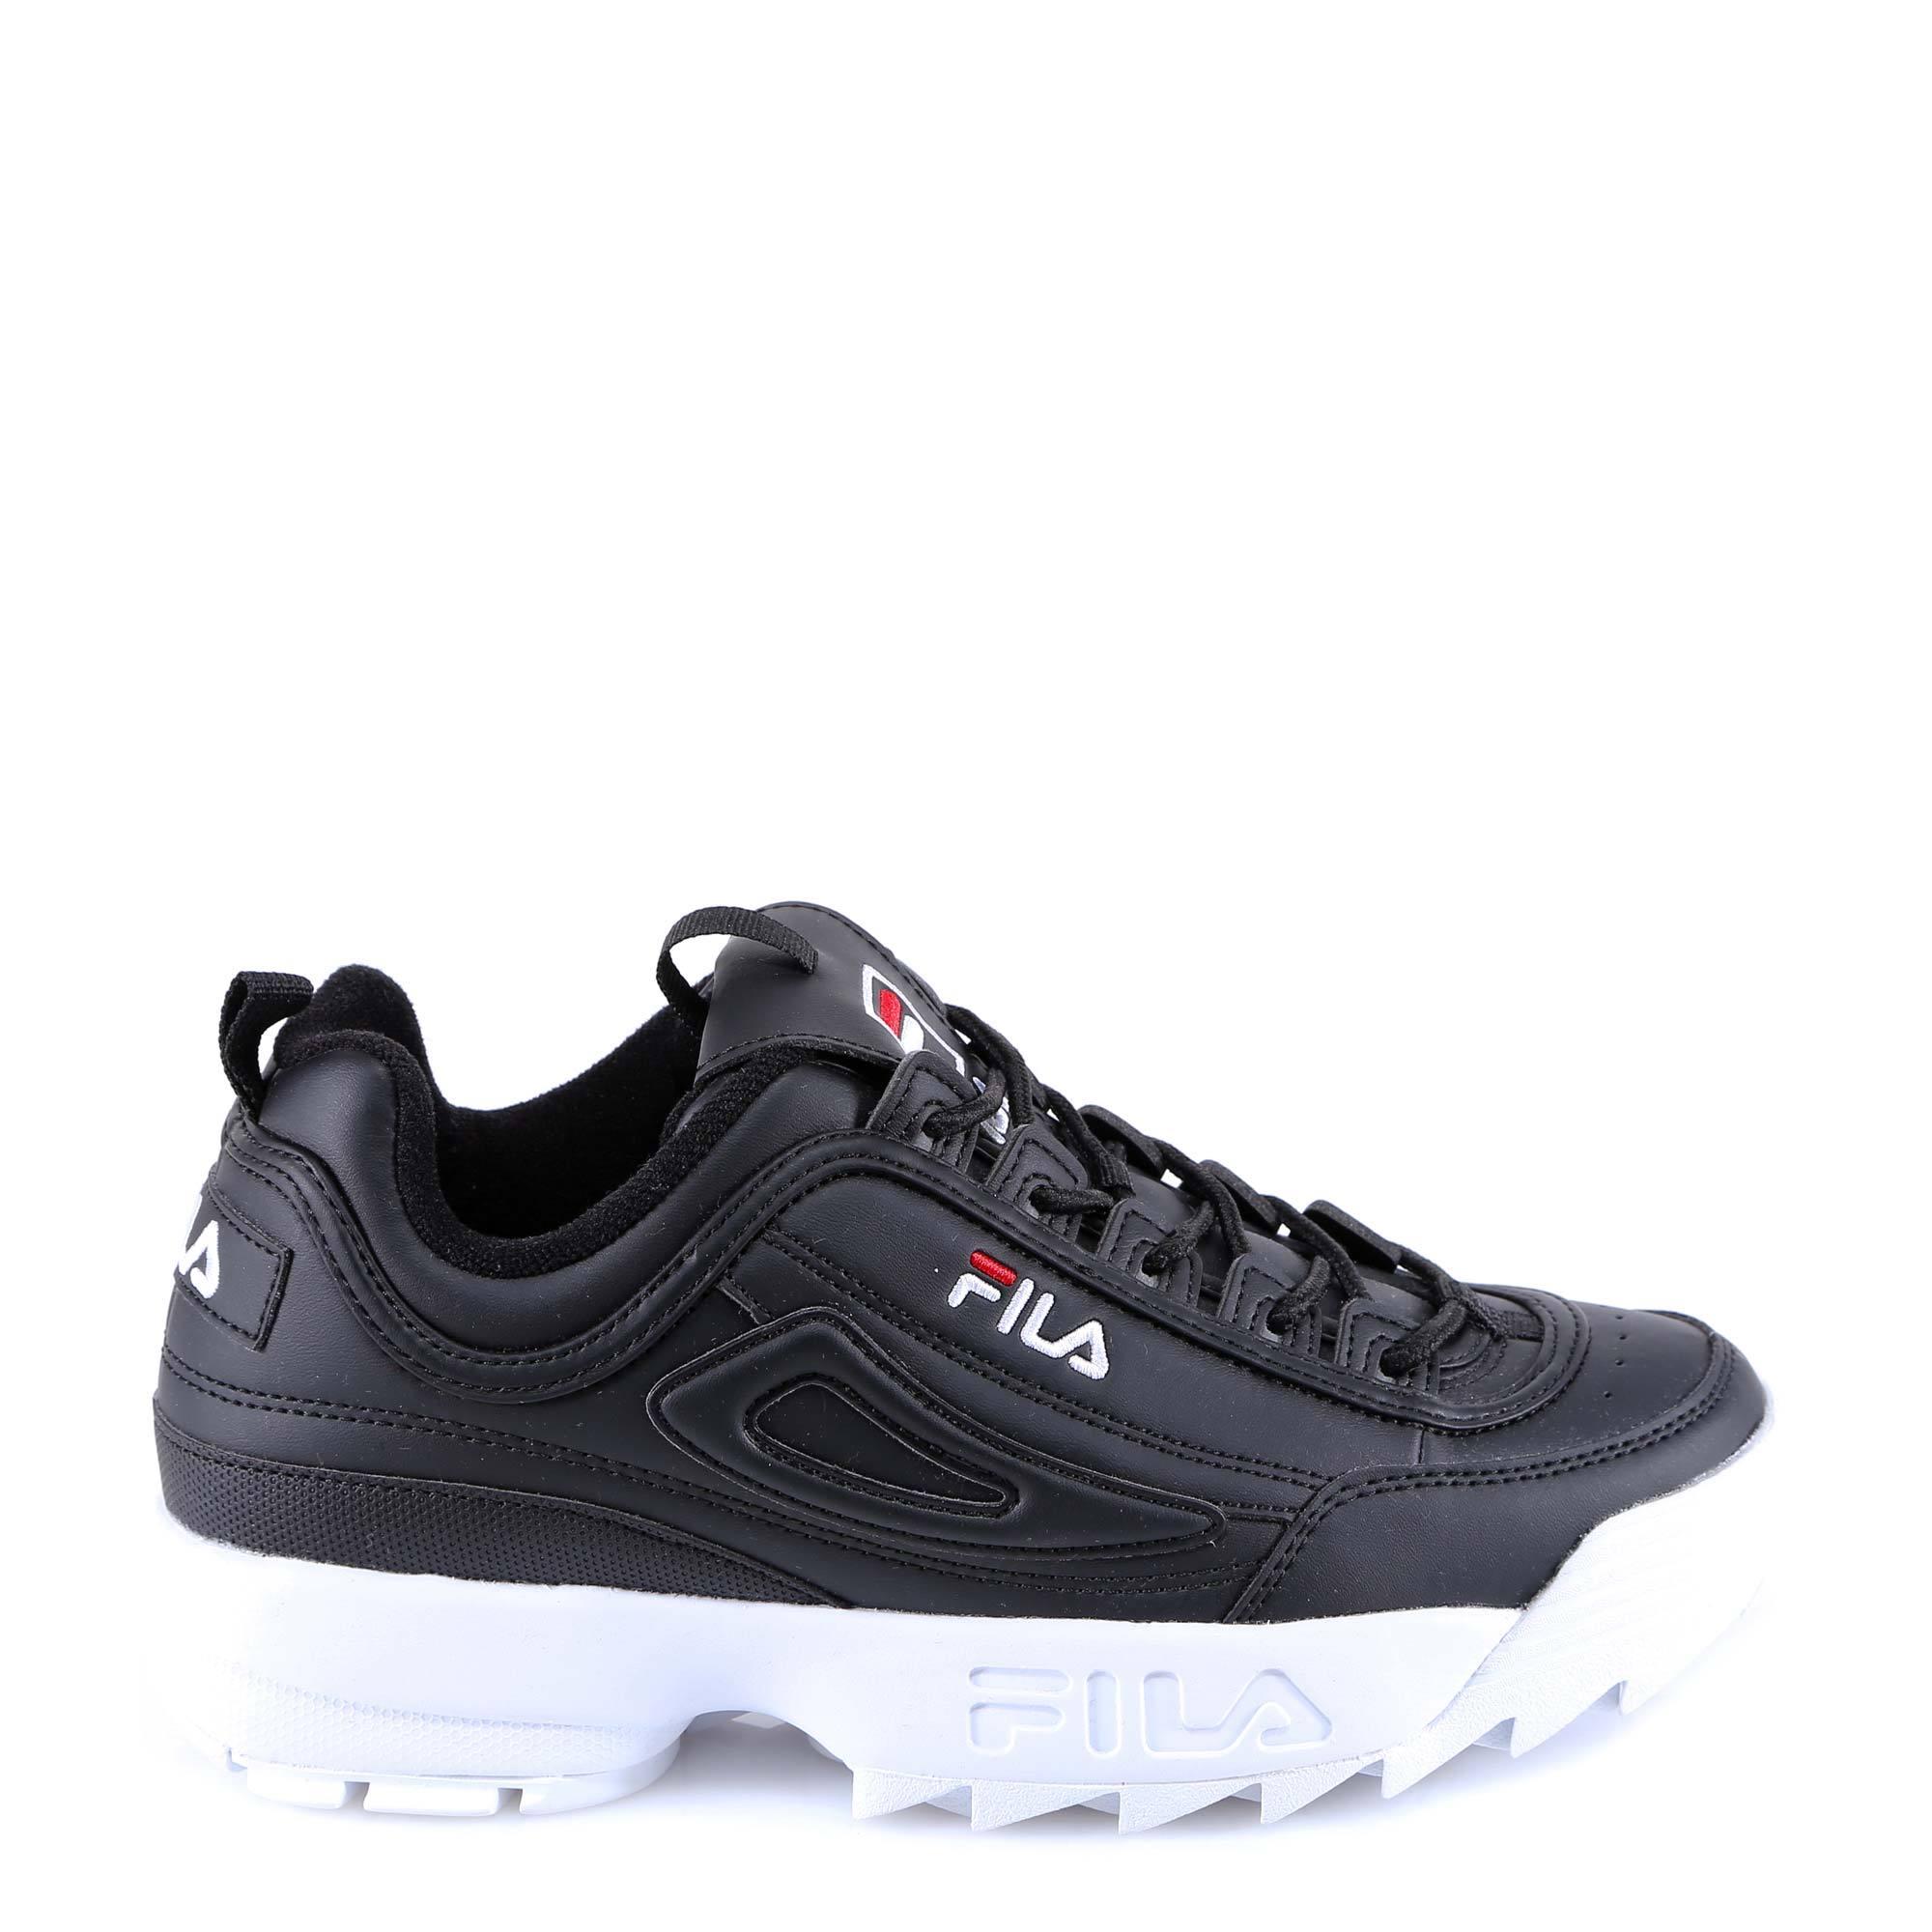 Fila Synthetic Disruptor Chunky Sneakers in Black for Men - Lyst